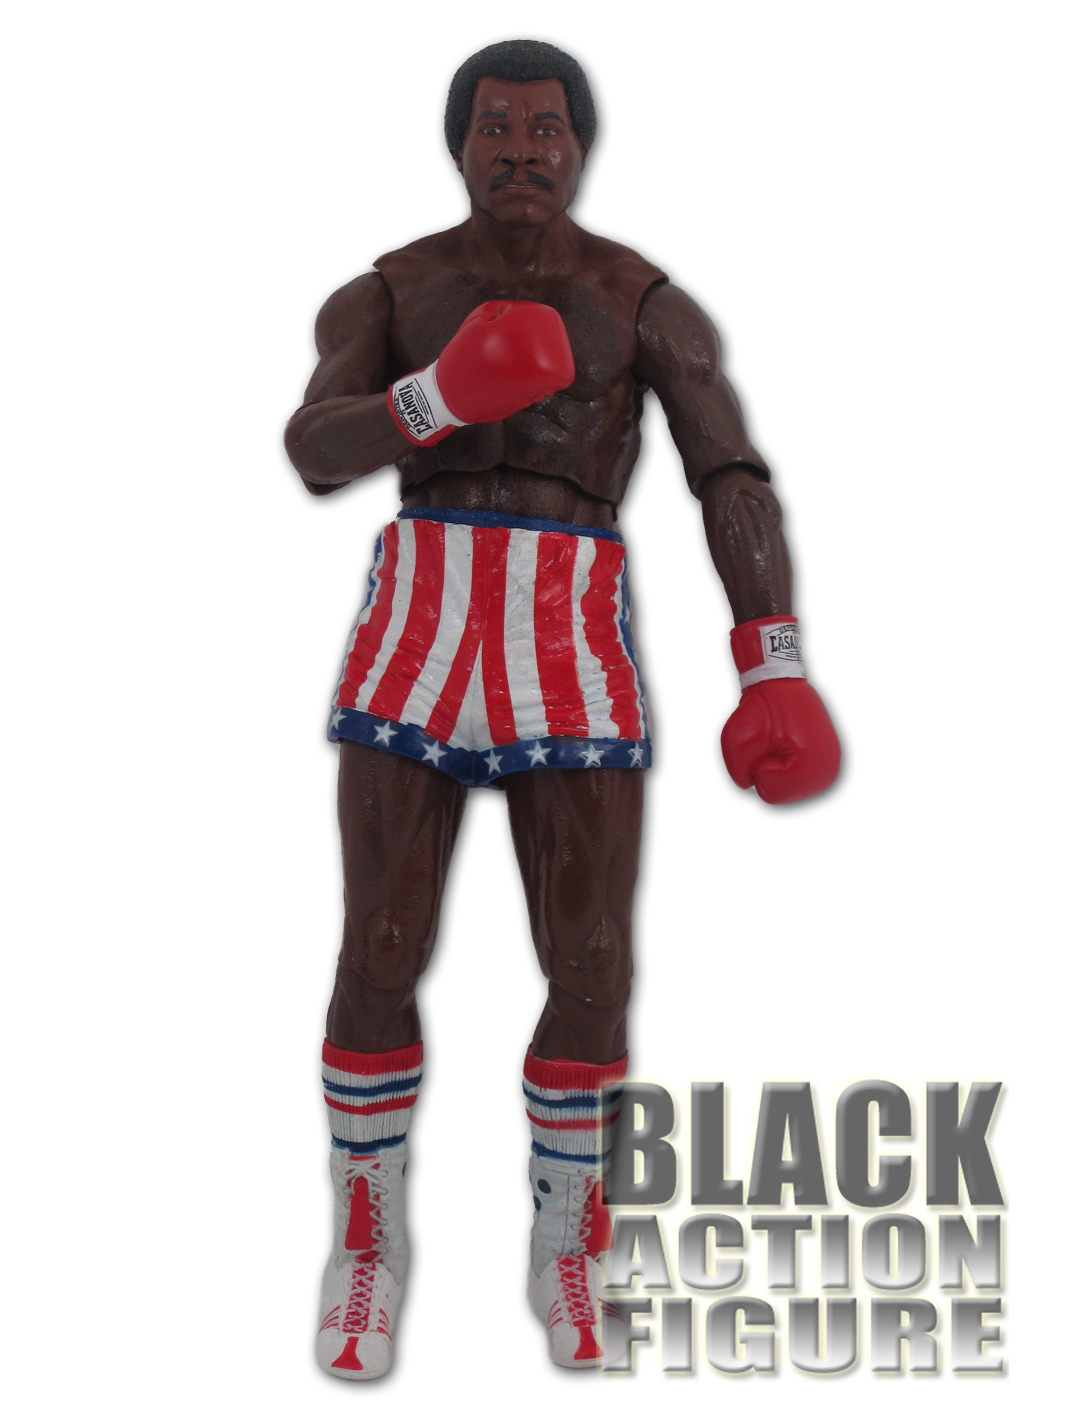 Apollo Creed Is A Fictional Character From The Rocky Films Initially